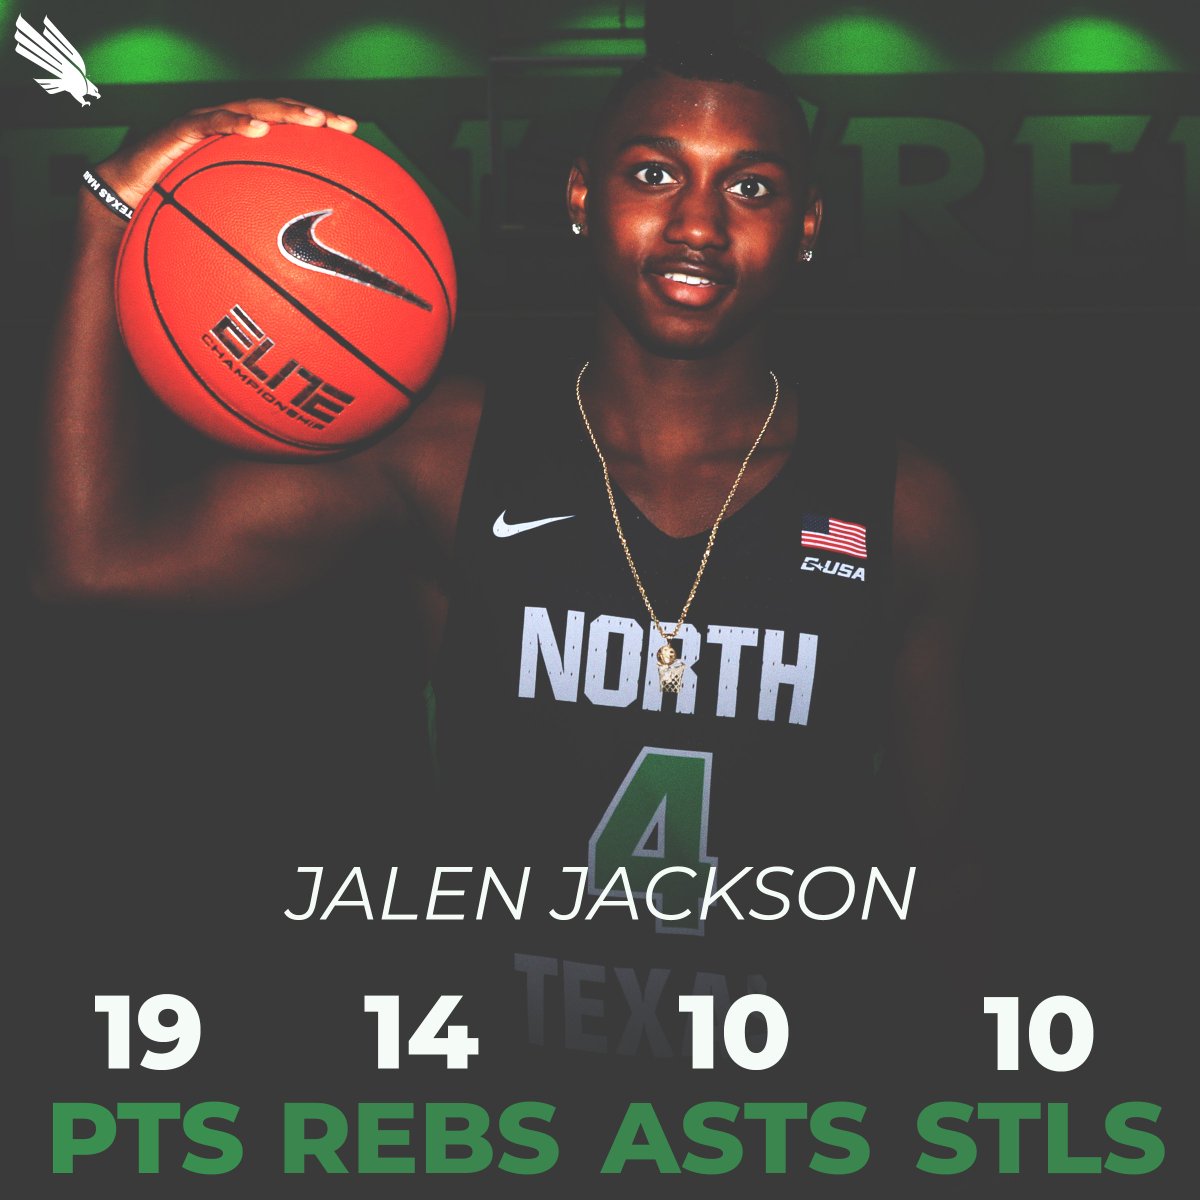 The young buck went crazy tonight. 
#QuadrupleDouble #GMG